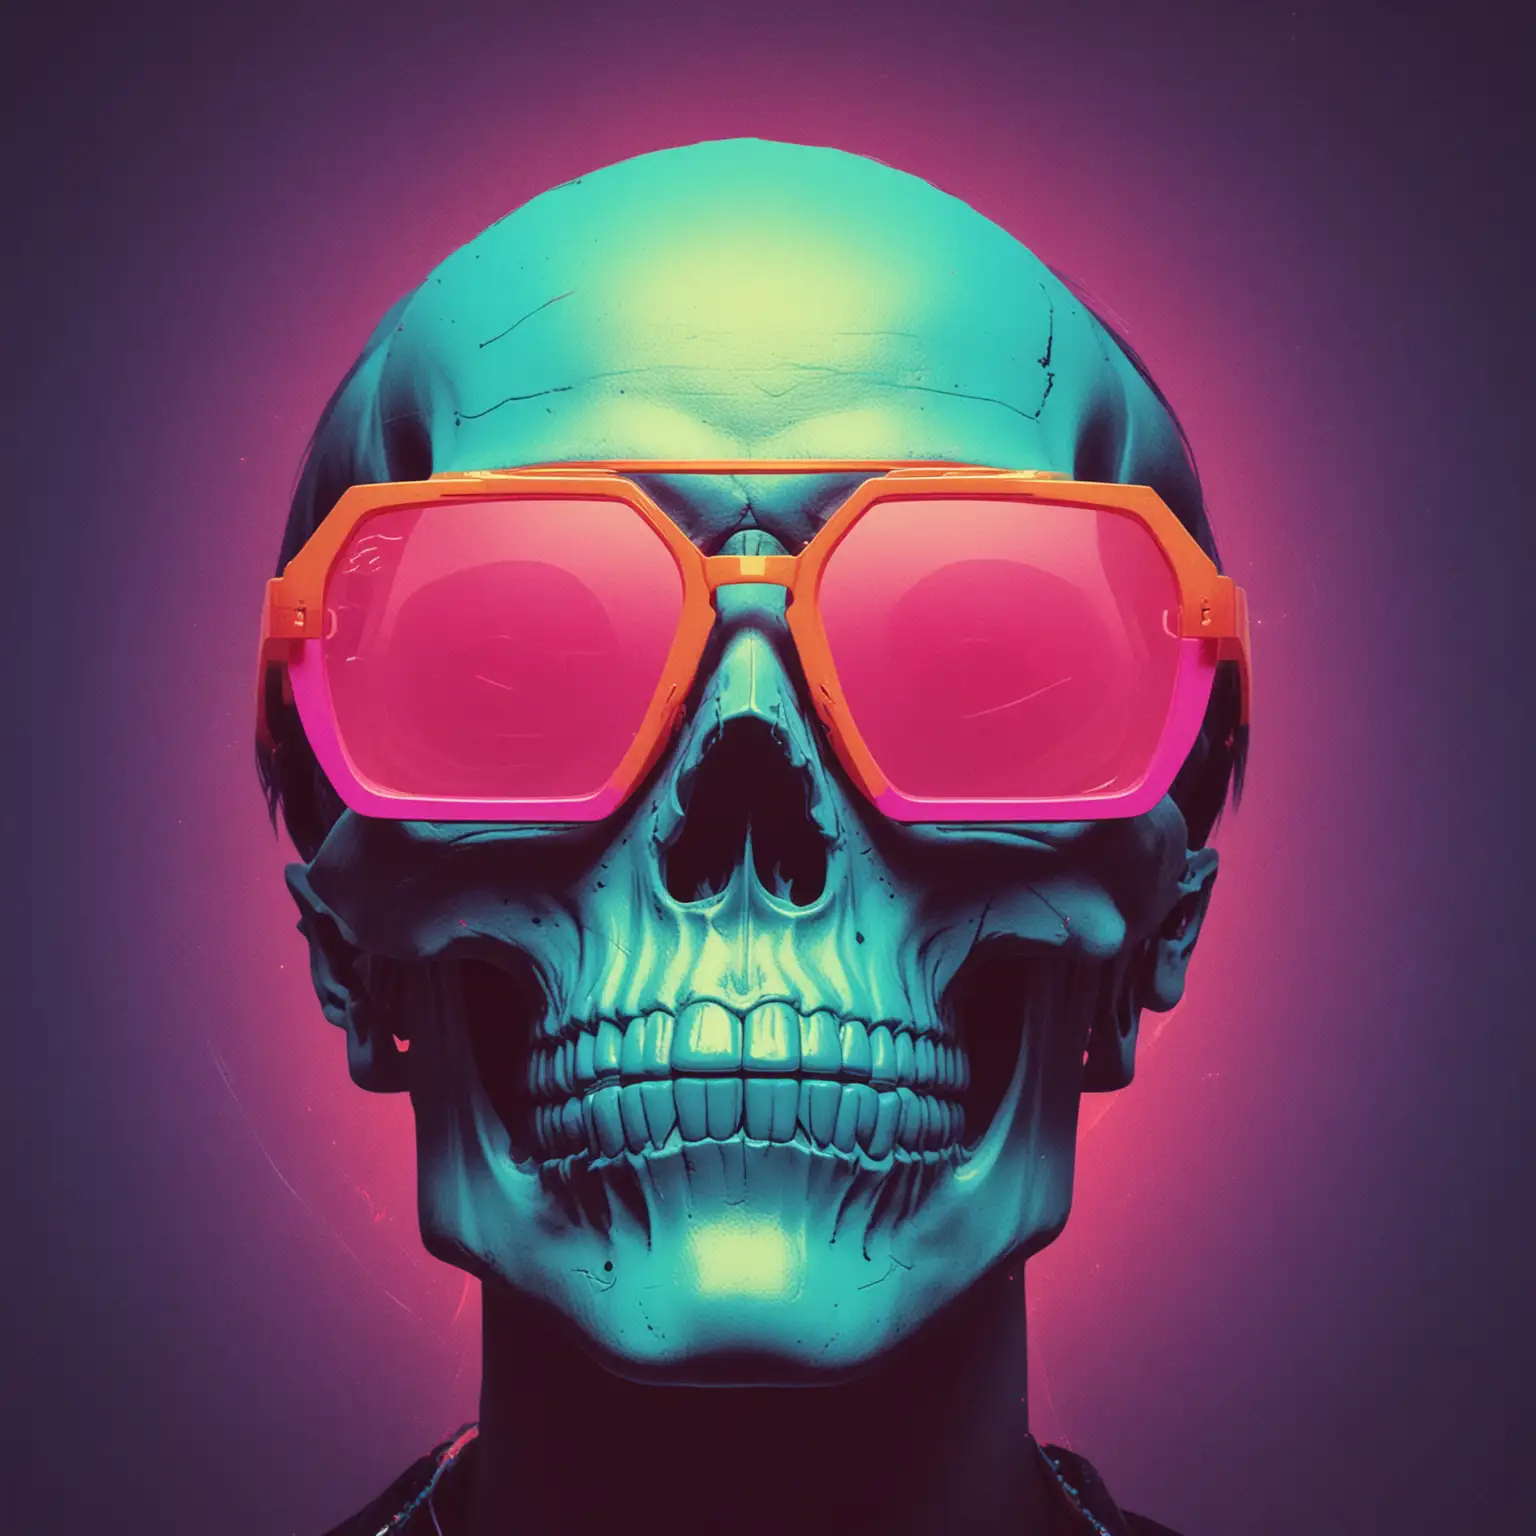 synth neon sunglasses in the style of minimalist 80s trance poster illustration featuring skull, neon, bold, color-blocked compositions, geometric, faded. 